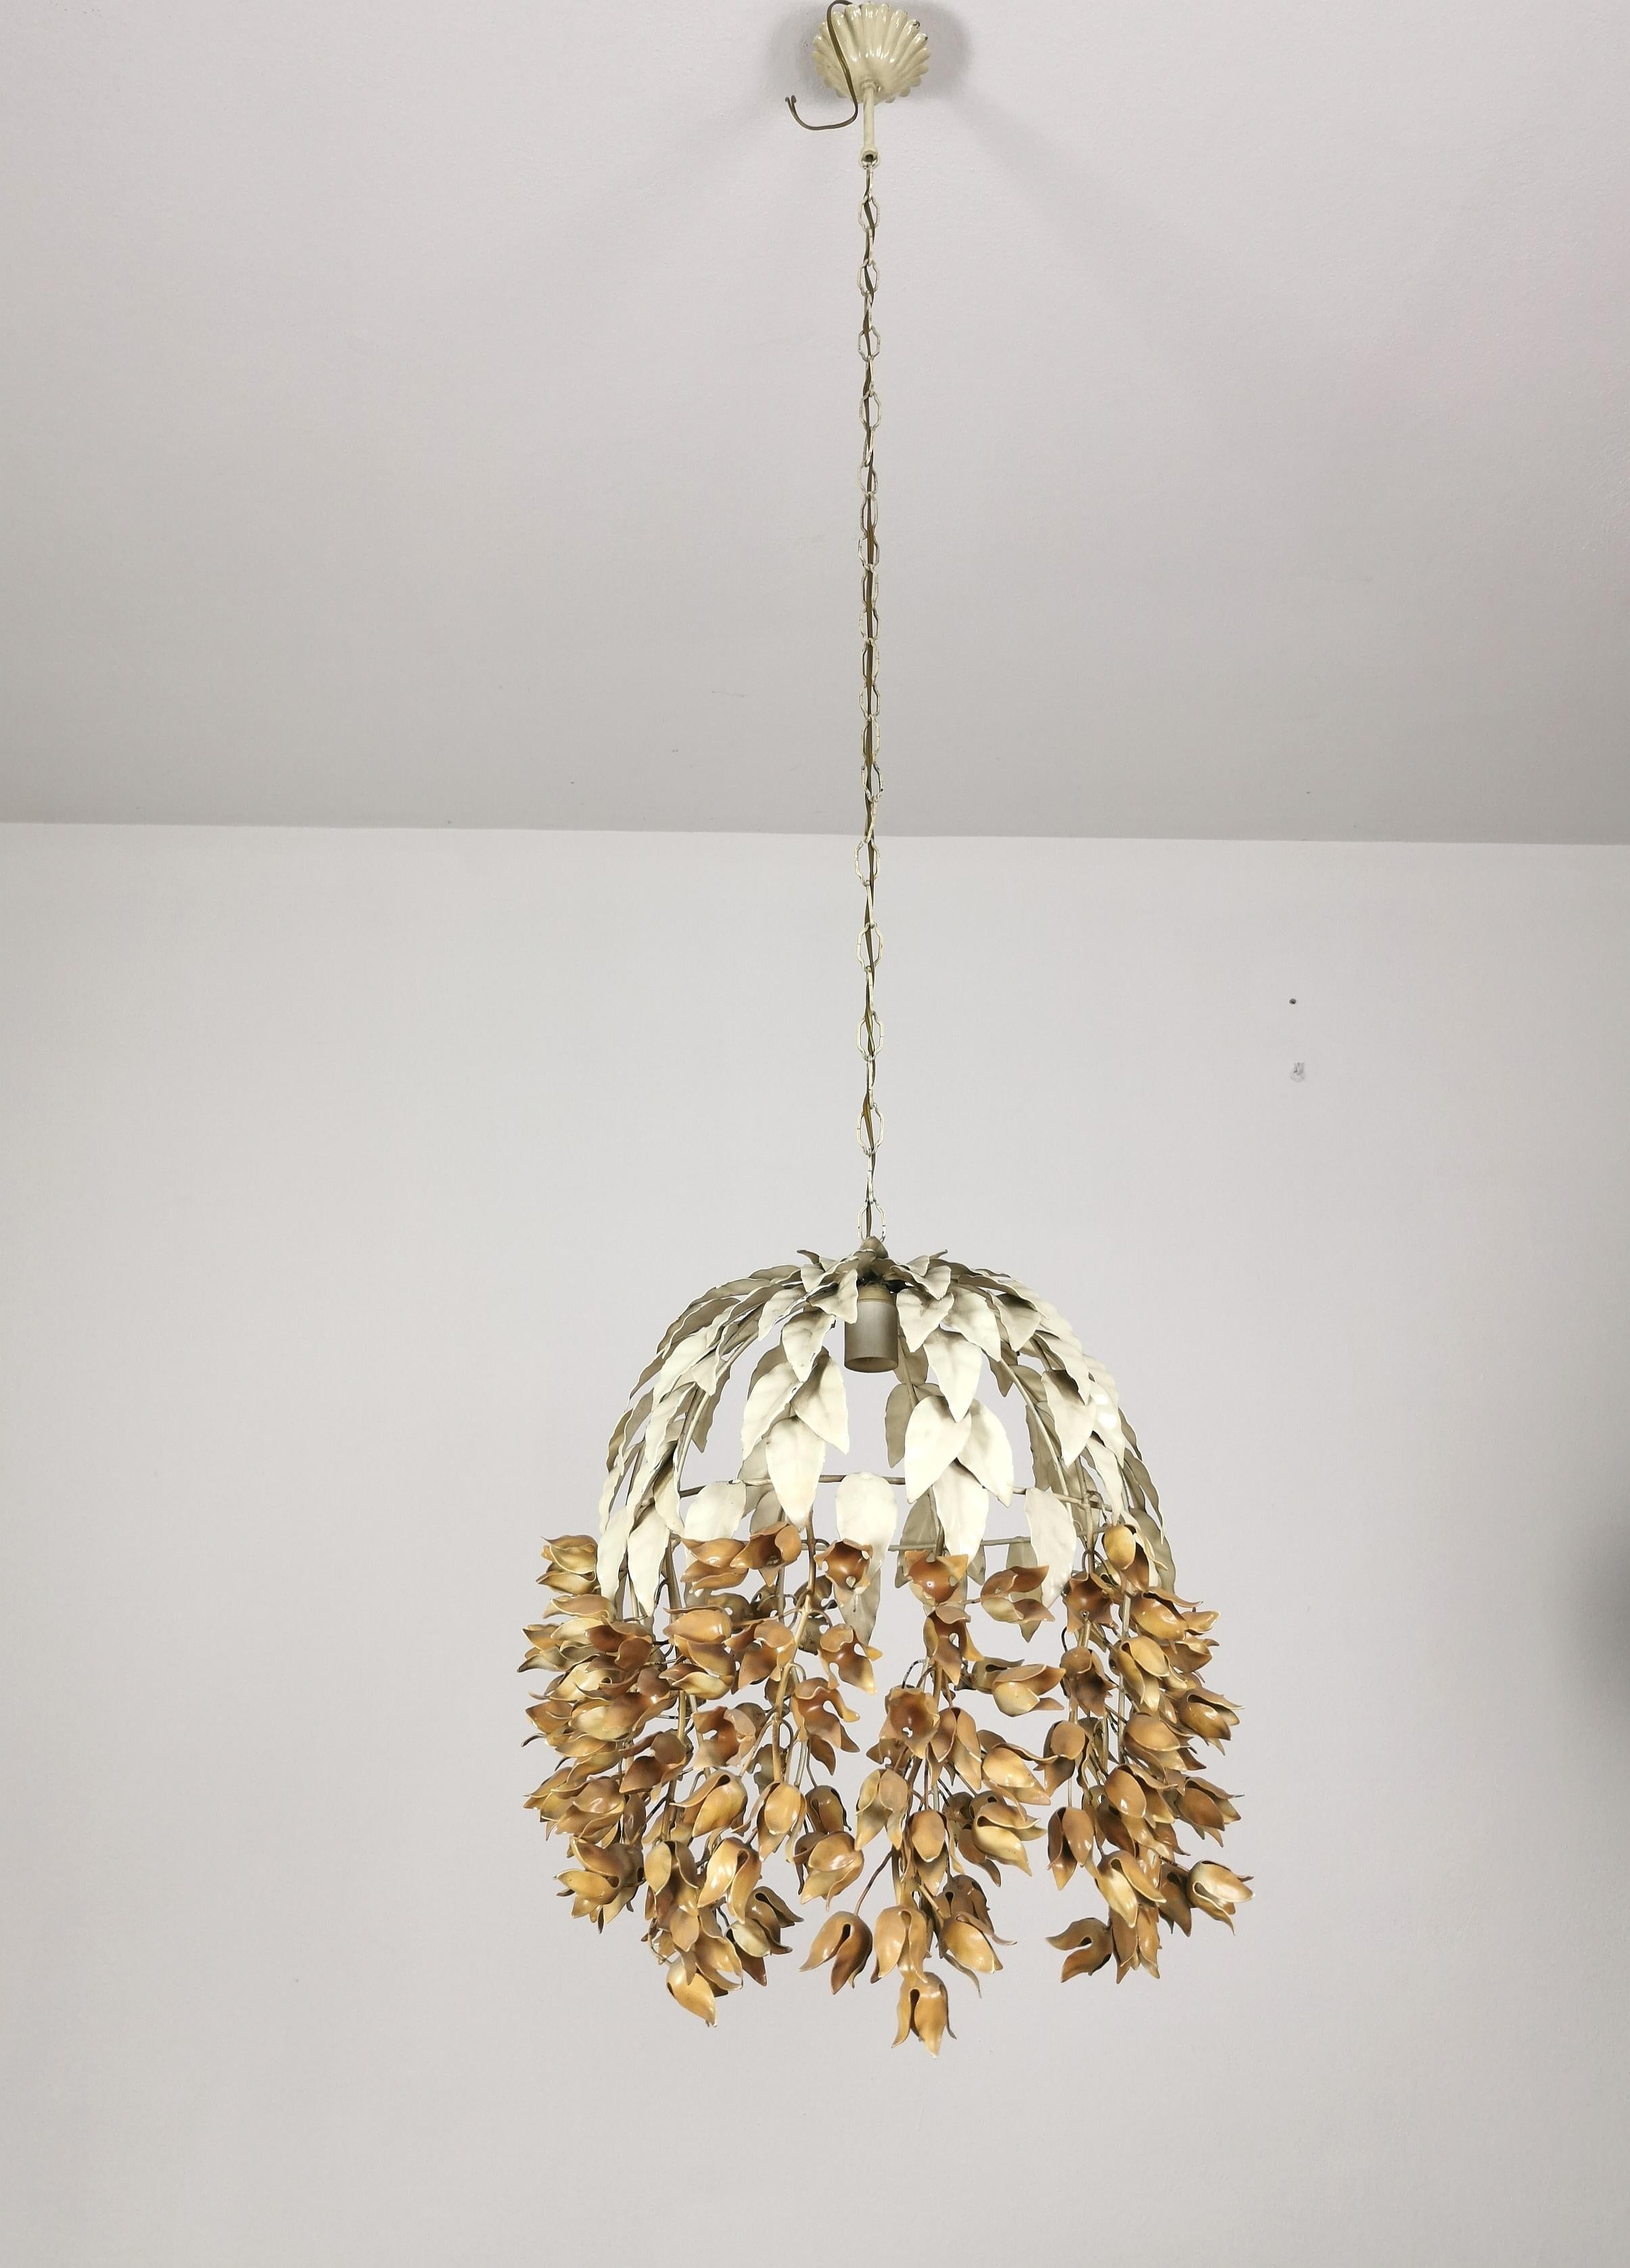 Pair of suspension lamps of different heights produced in Italy in the 1960s. Each individual suspension lamp was made of enamelled metal with leaf decorations in the upper part and dried flower decorations in the lower part.



Note: We try to